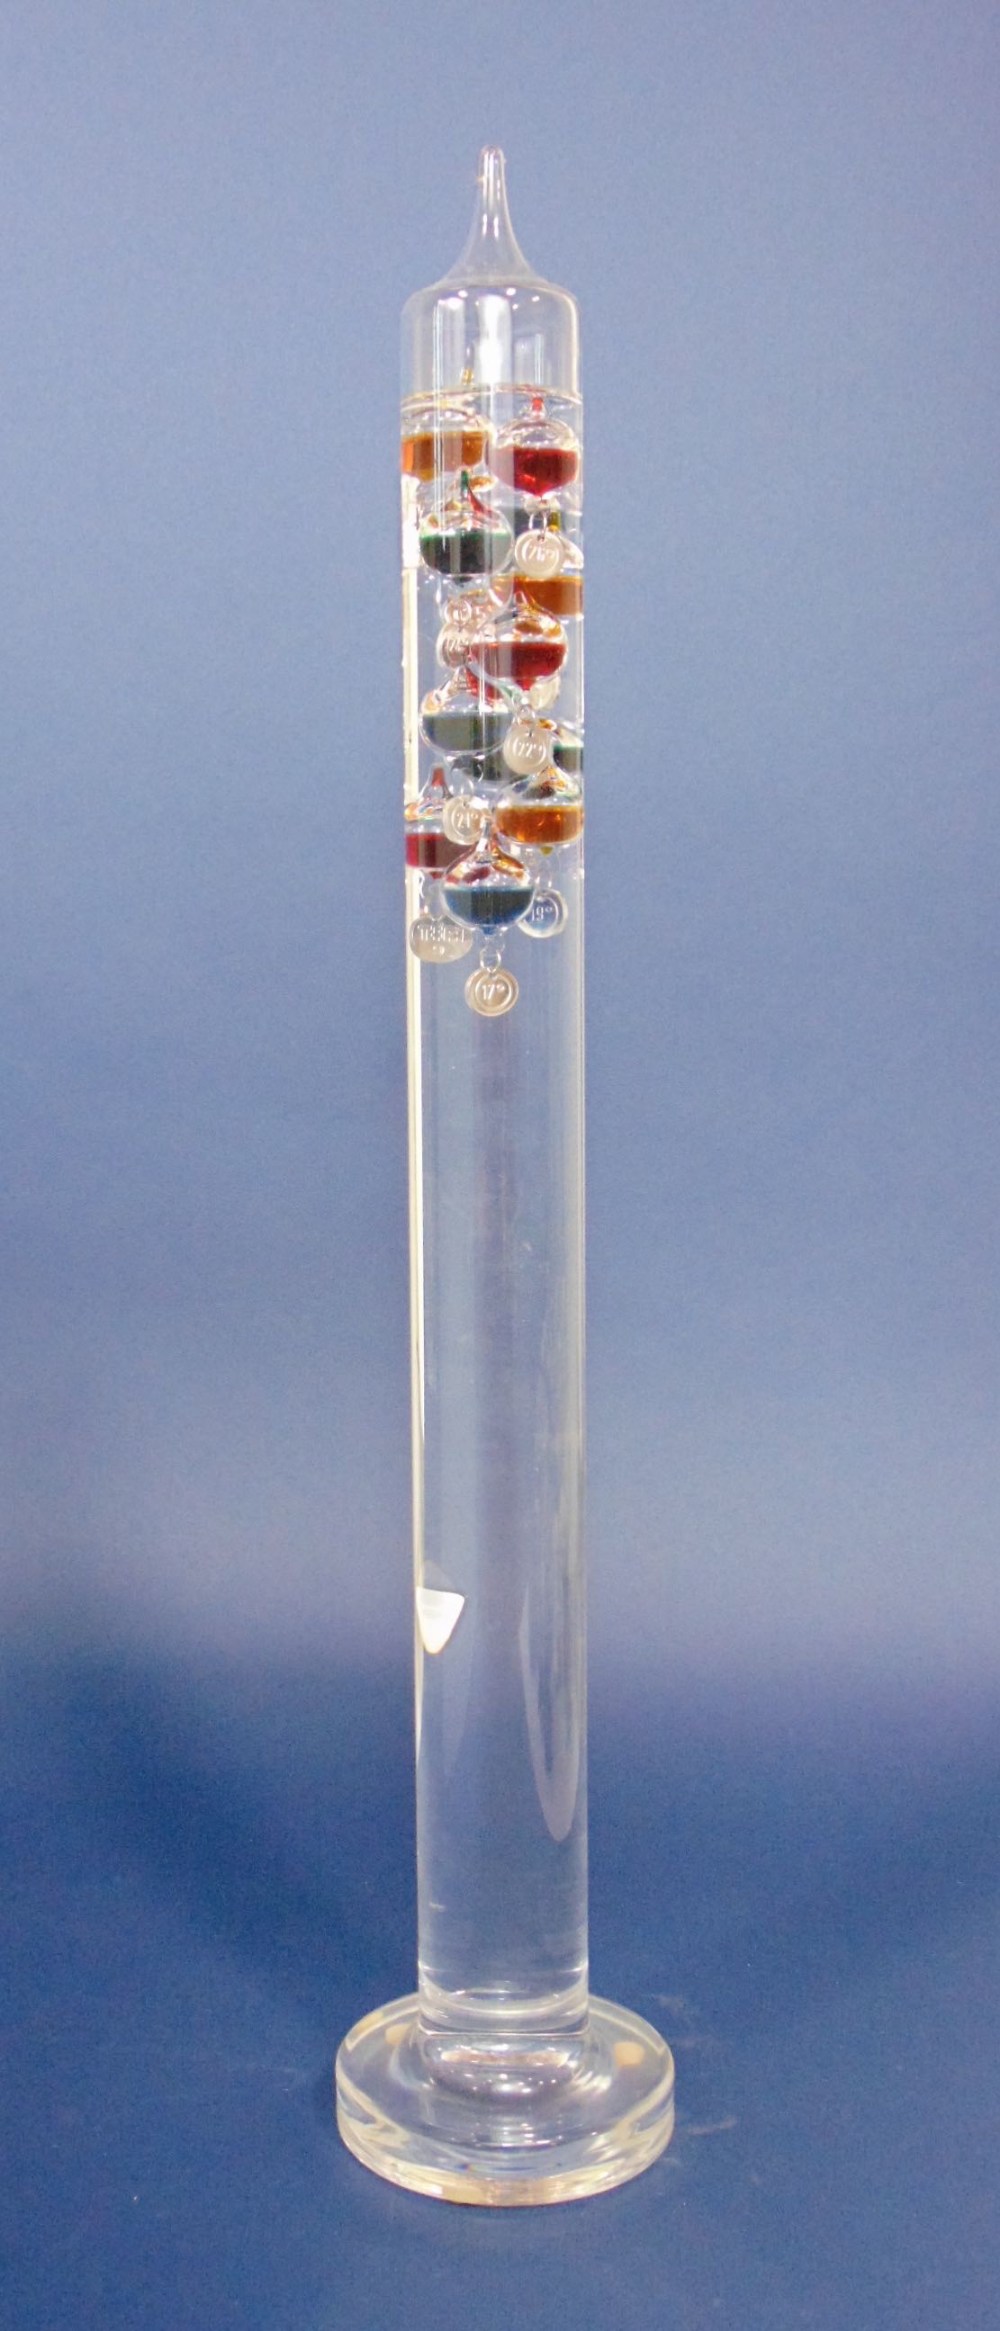 Interesting Galileo glass thermometer fitted with various smaller glass balls, filled with